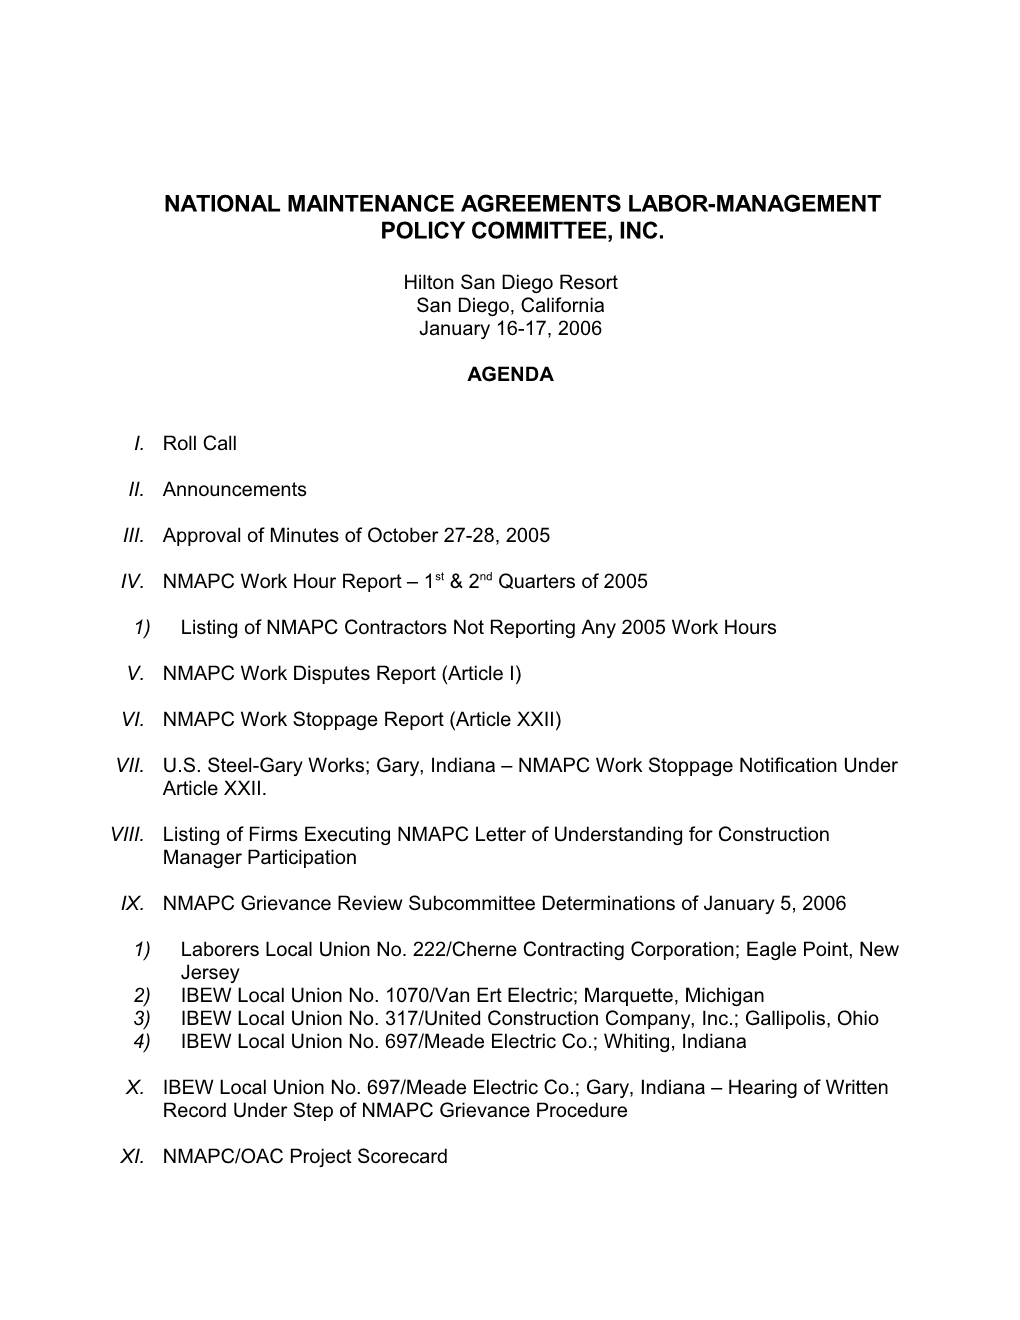 National Maintenance Agreements Labor-Management Policy Committee, Inc